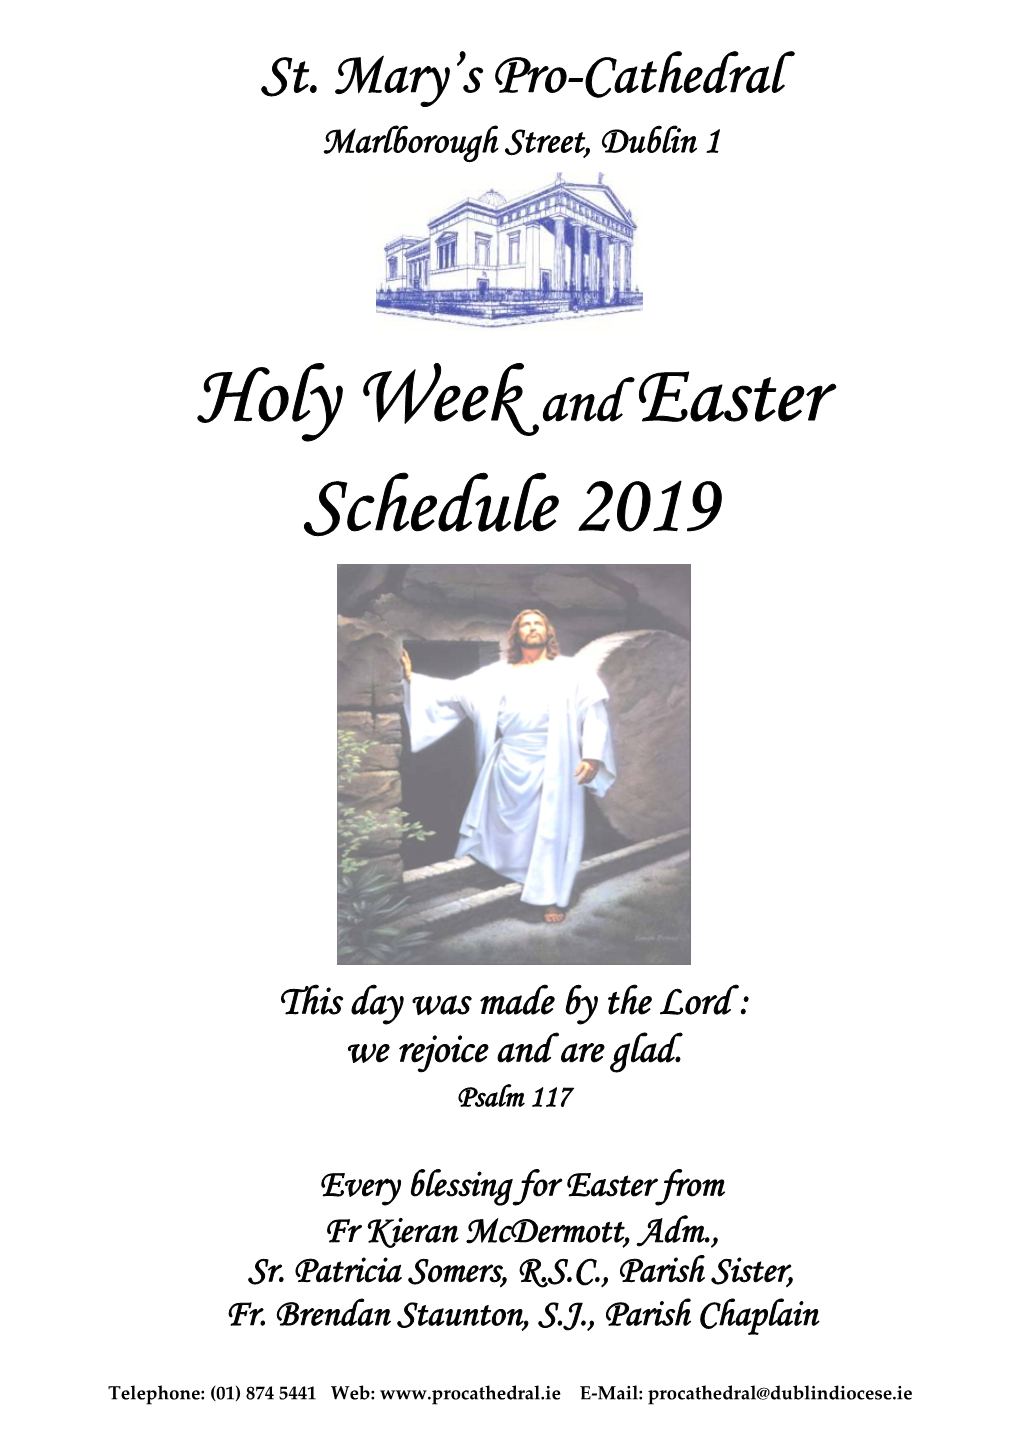 Holy Week and Easter Schedule 2019